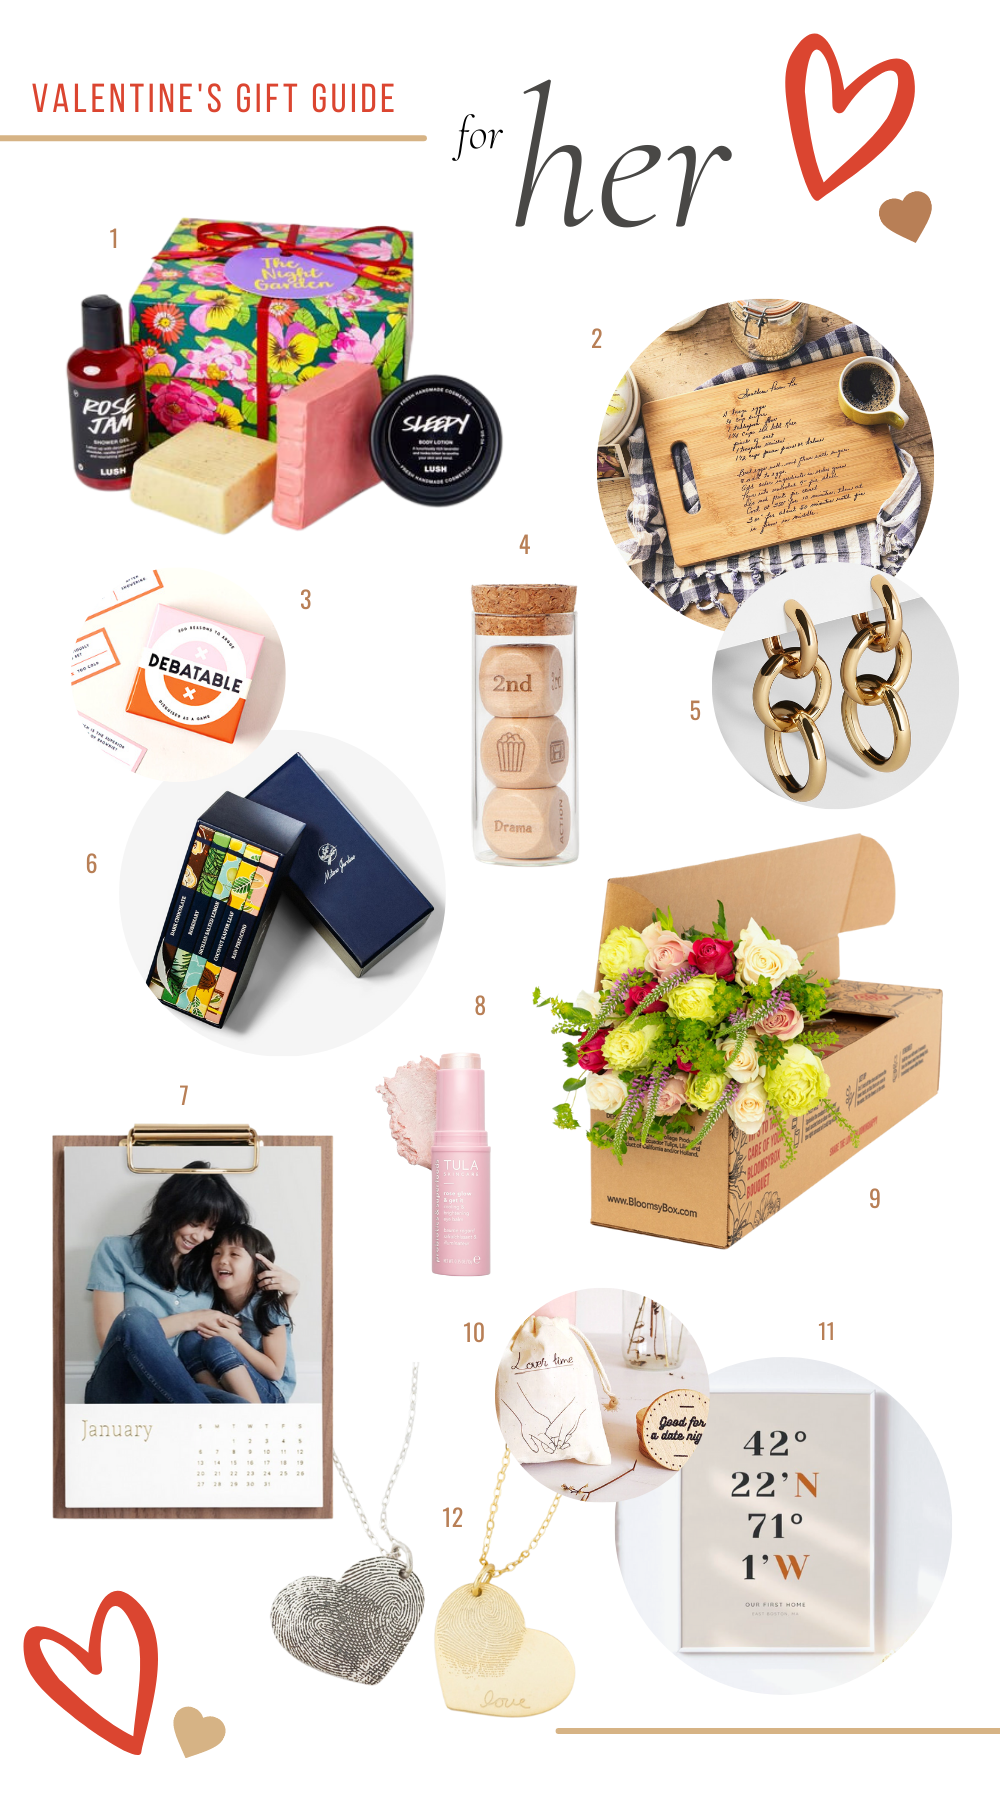 Valentine's Day Gift Guide for him and her by top uS lifestyle blogger, Tabitha blue of Fresh Mommy Blog